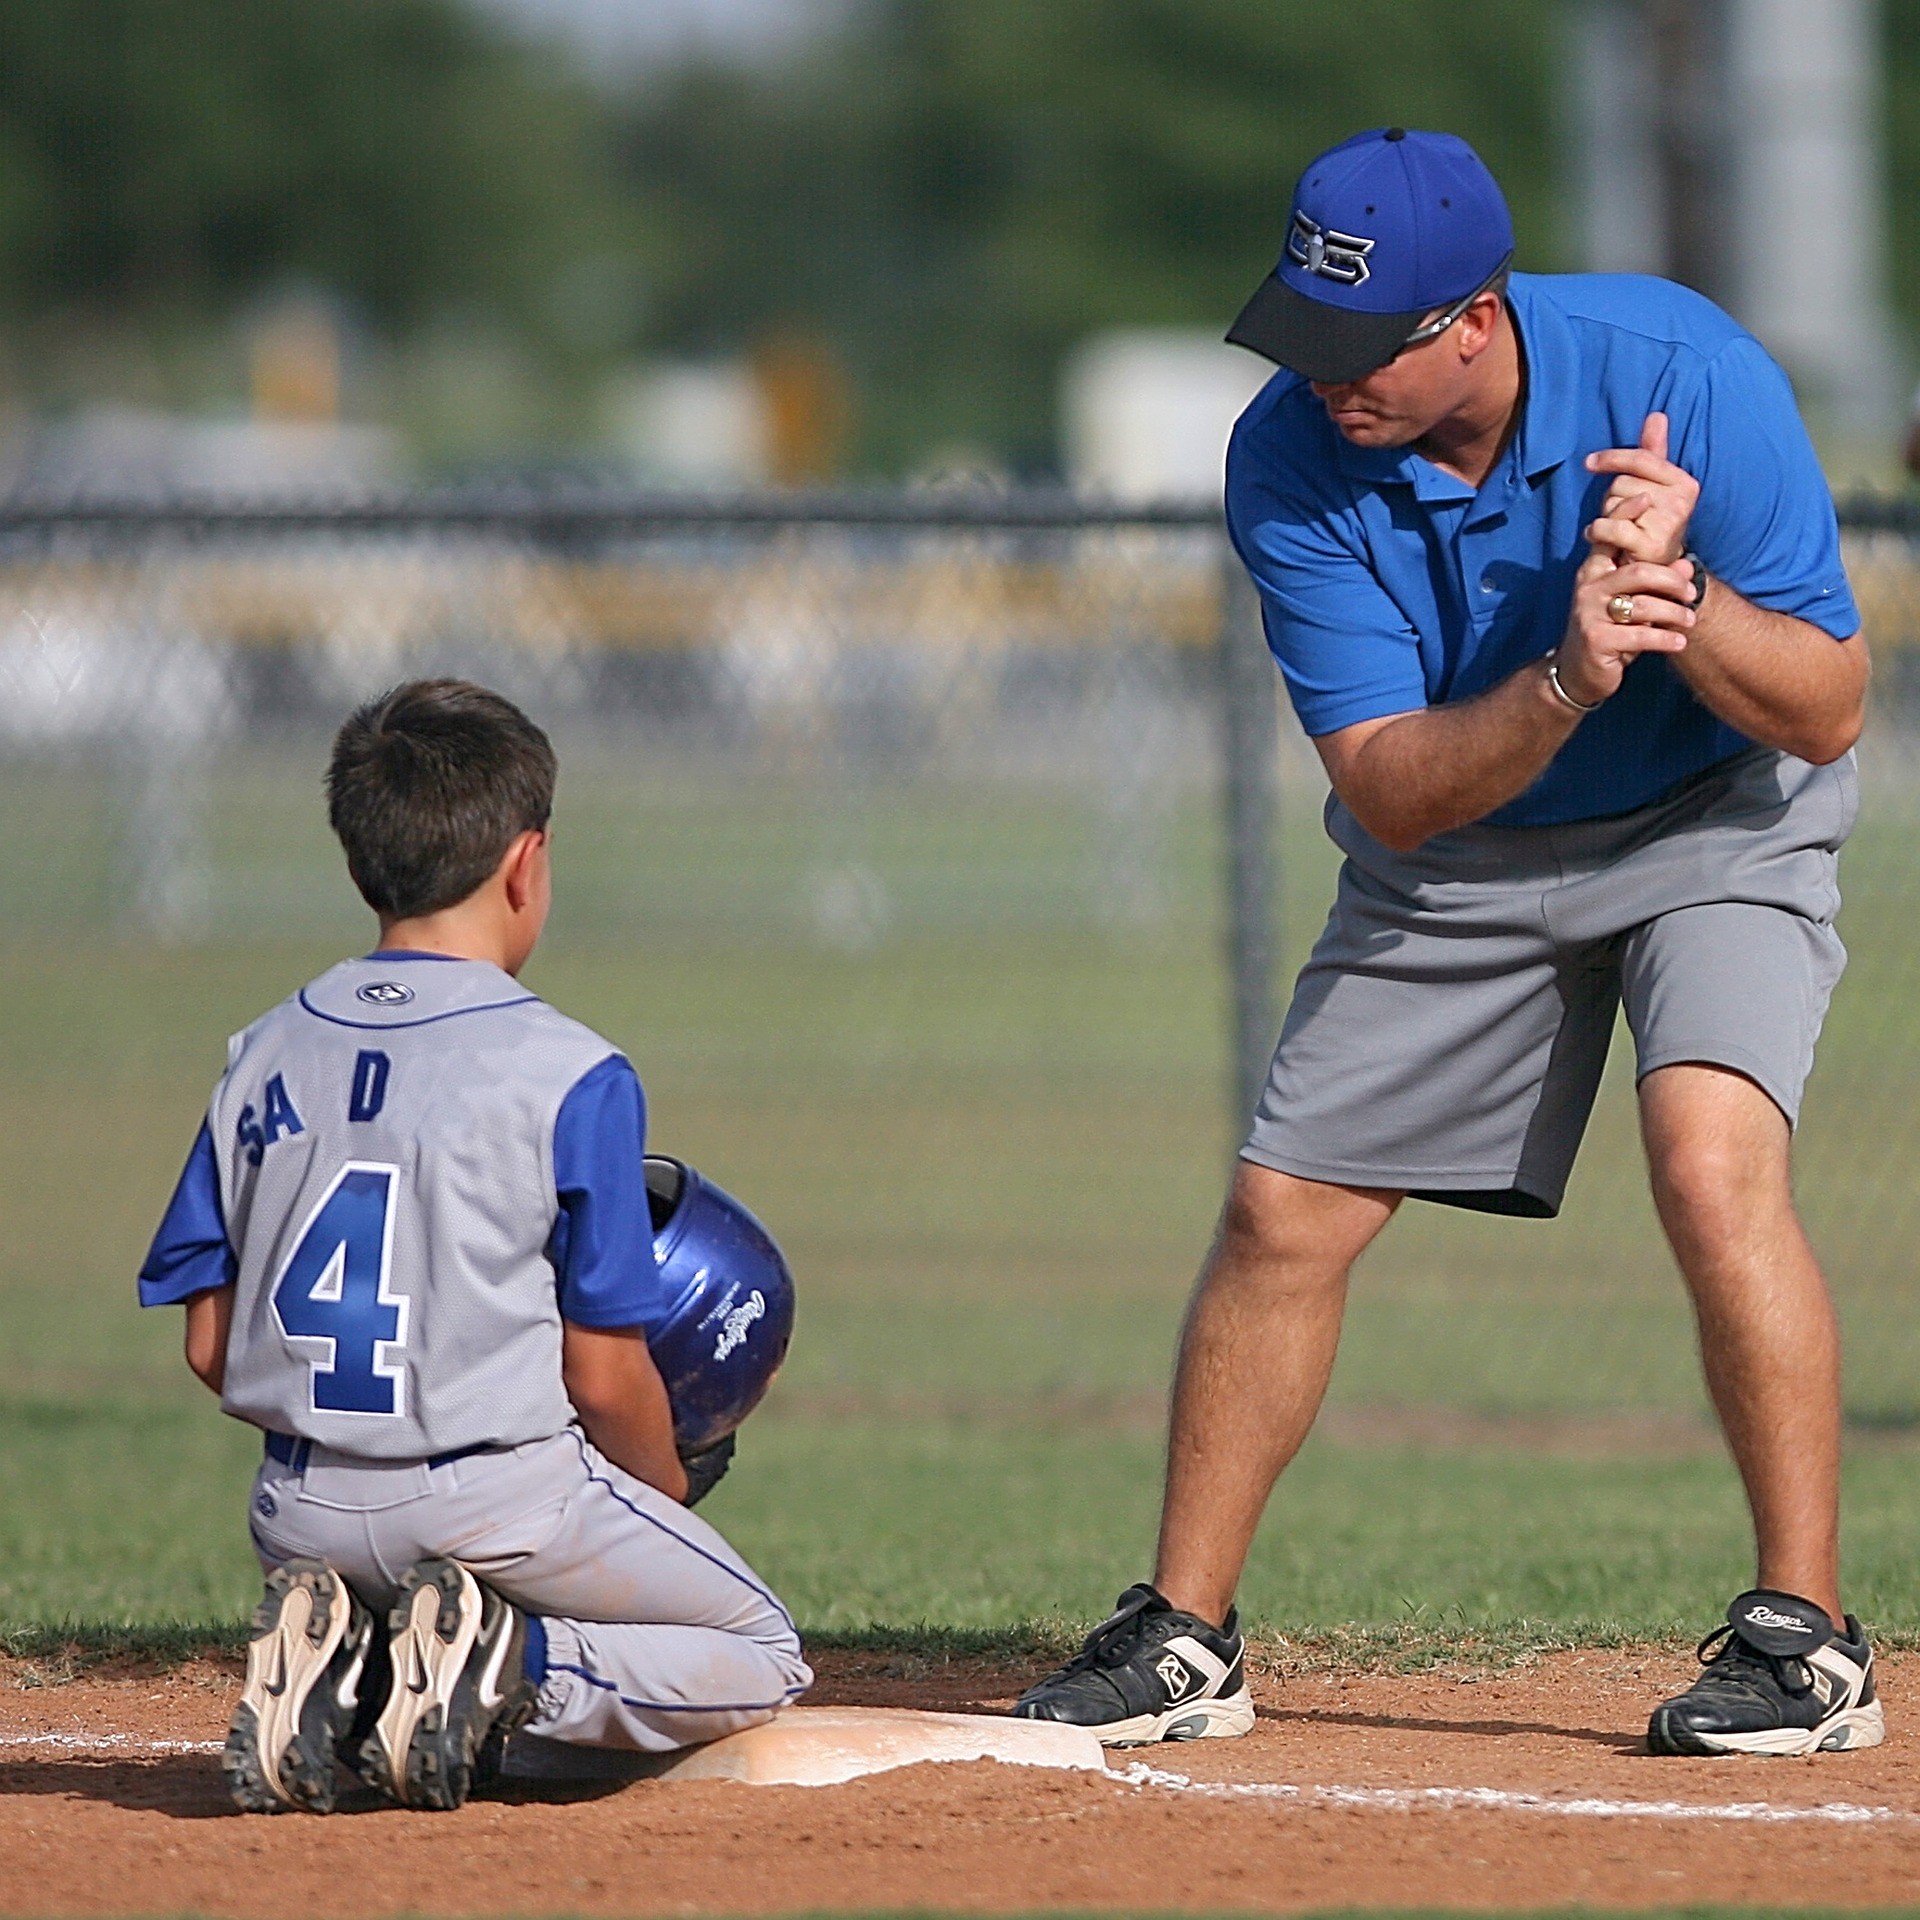 Youth sports coach working with boy